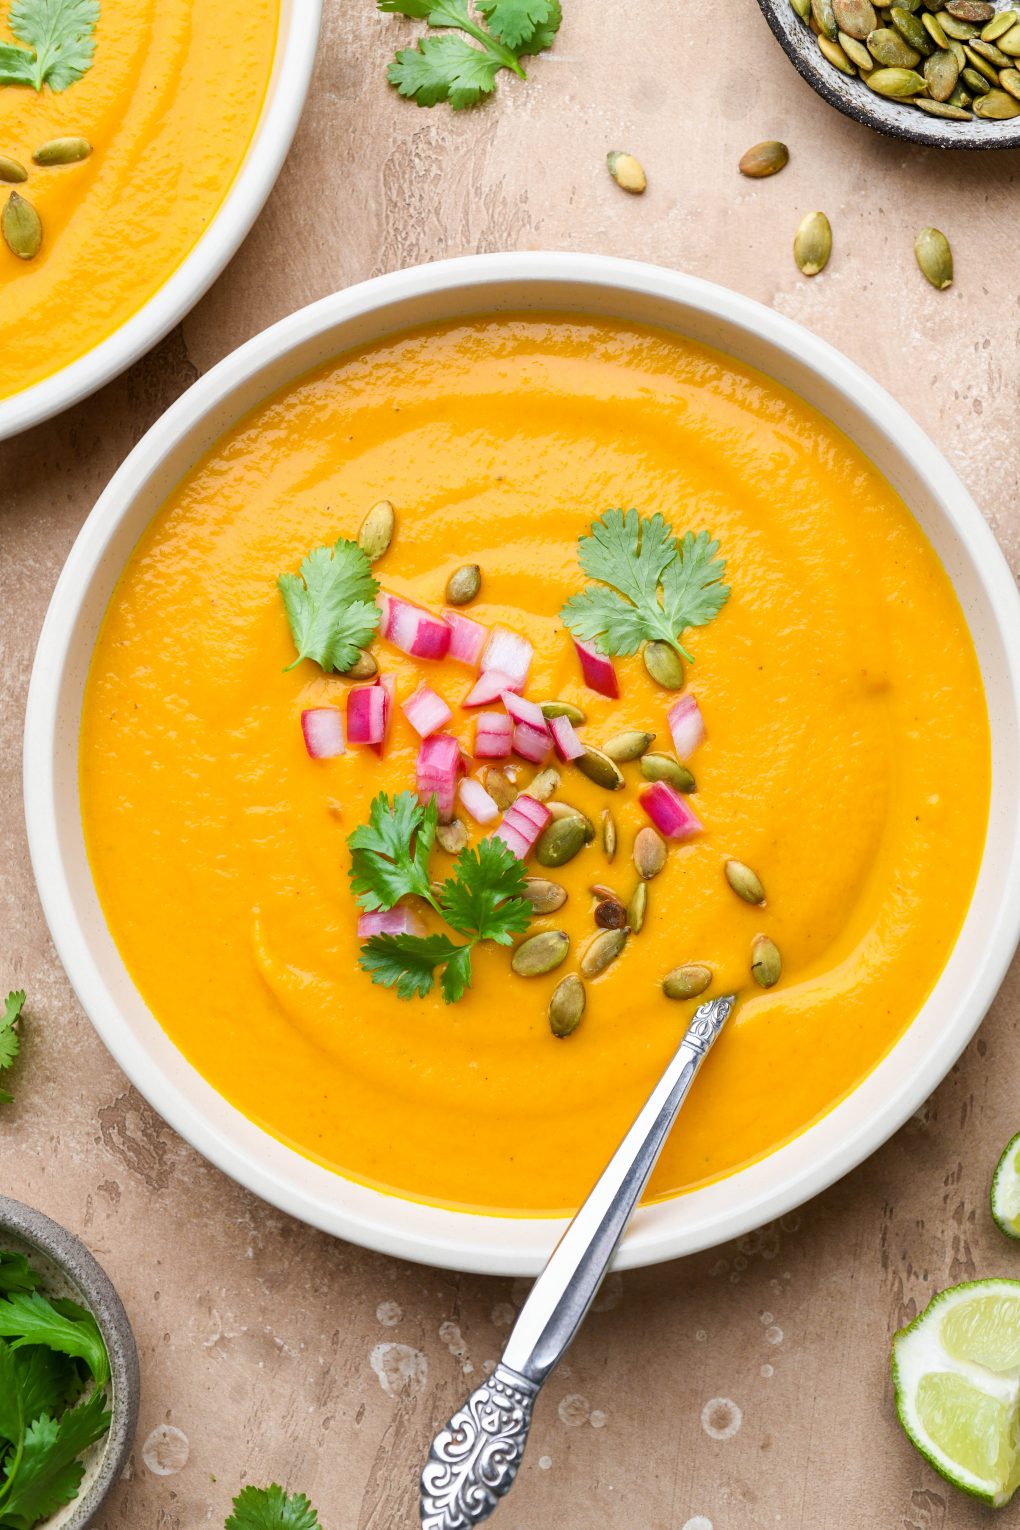 Large wide bowl of bright orange creamy carrot soup on a light brown background. Soup is topped with fresh cilantro leaves, chopped pickled red onions, and pumpkin seeds.